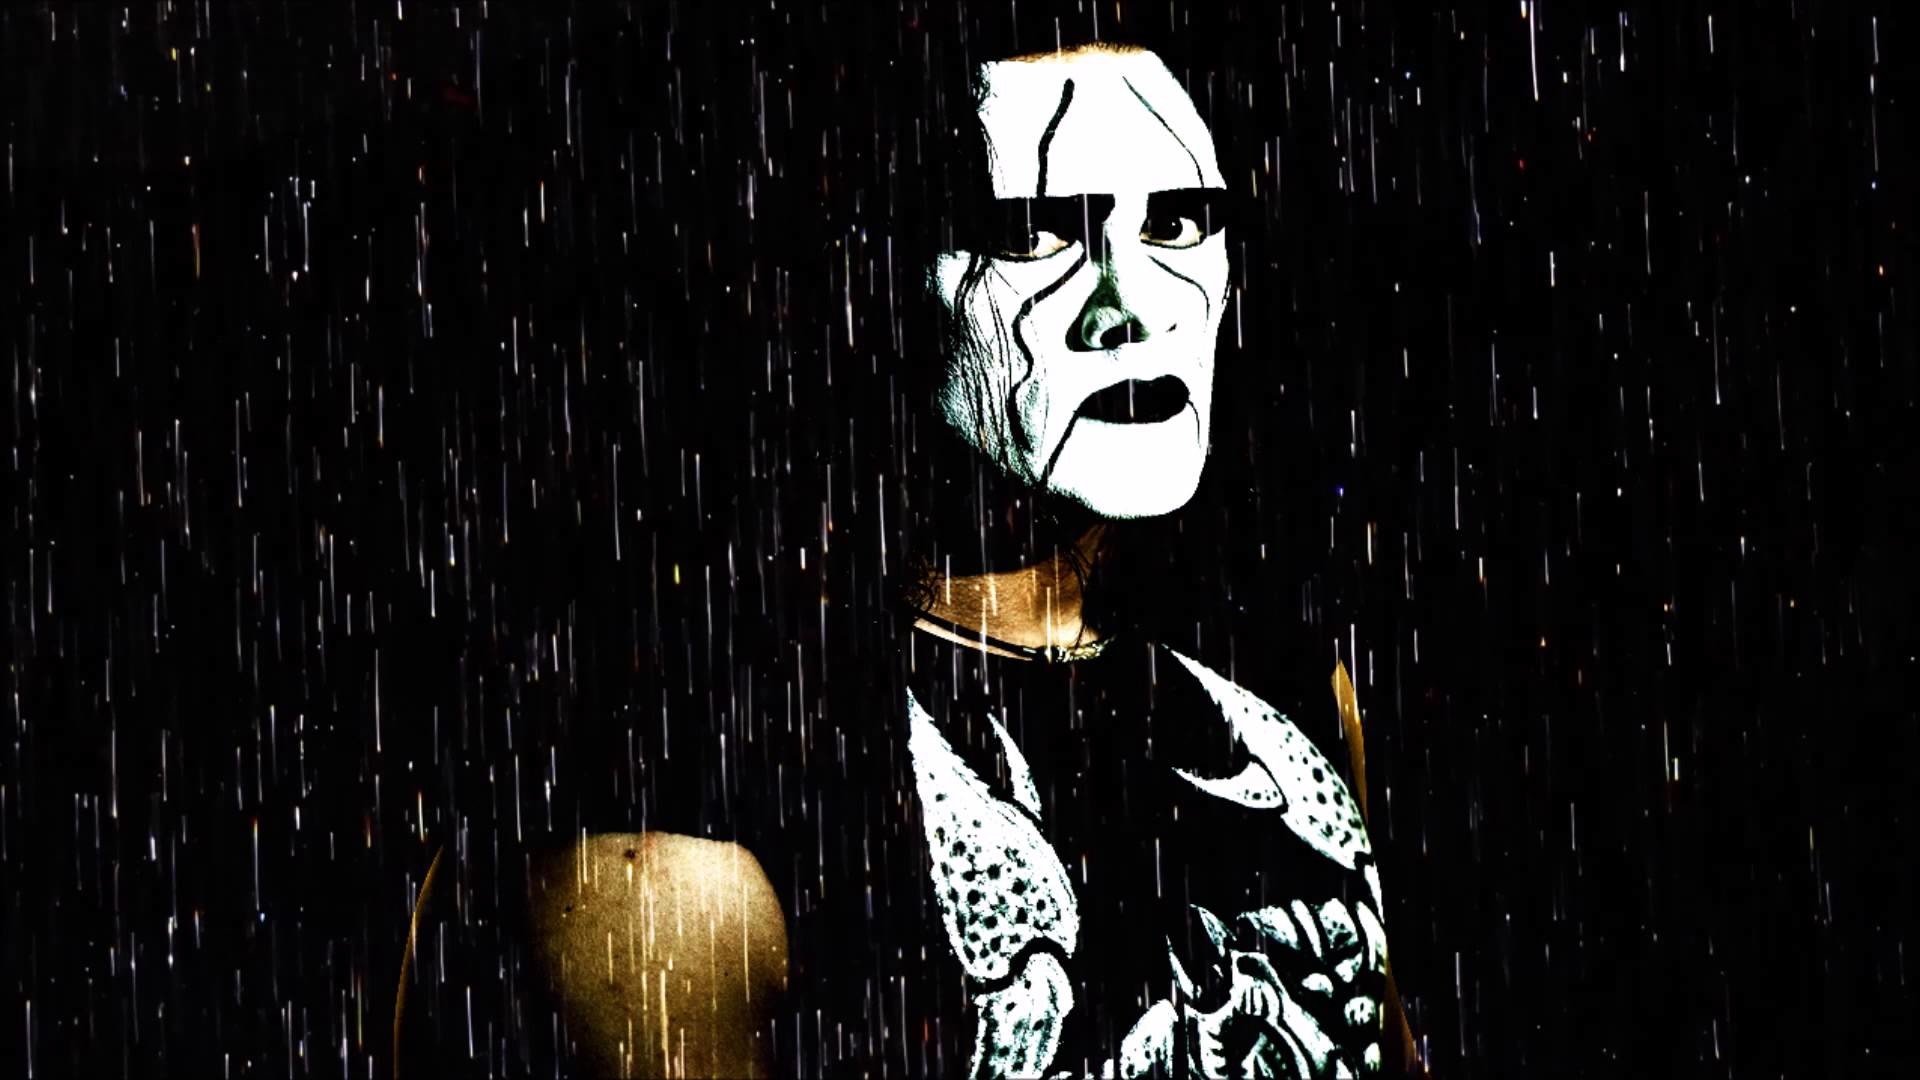 1920x1080 Sting WCW theme song "Seek And Destroy" by Metallica